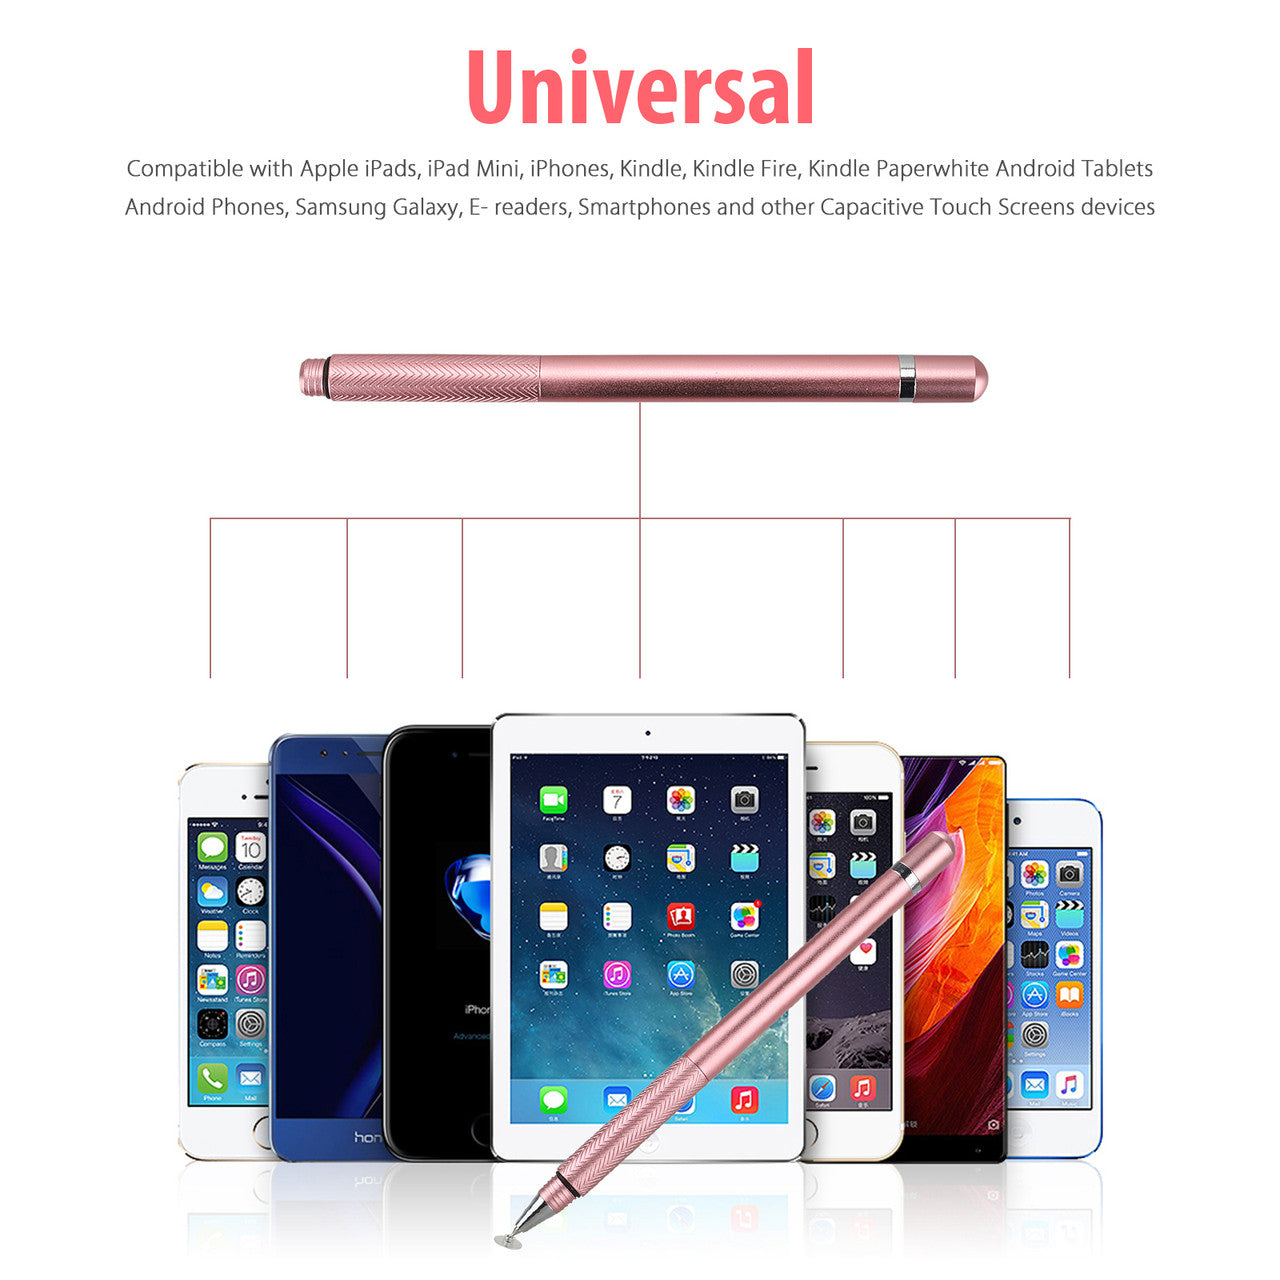 2 in 1 Universal High Sensitivity and Precision Stylus Pen Replacement for Touch Screen Tablets